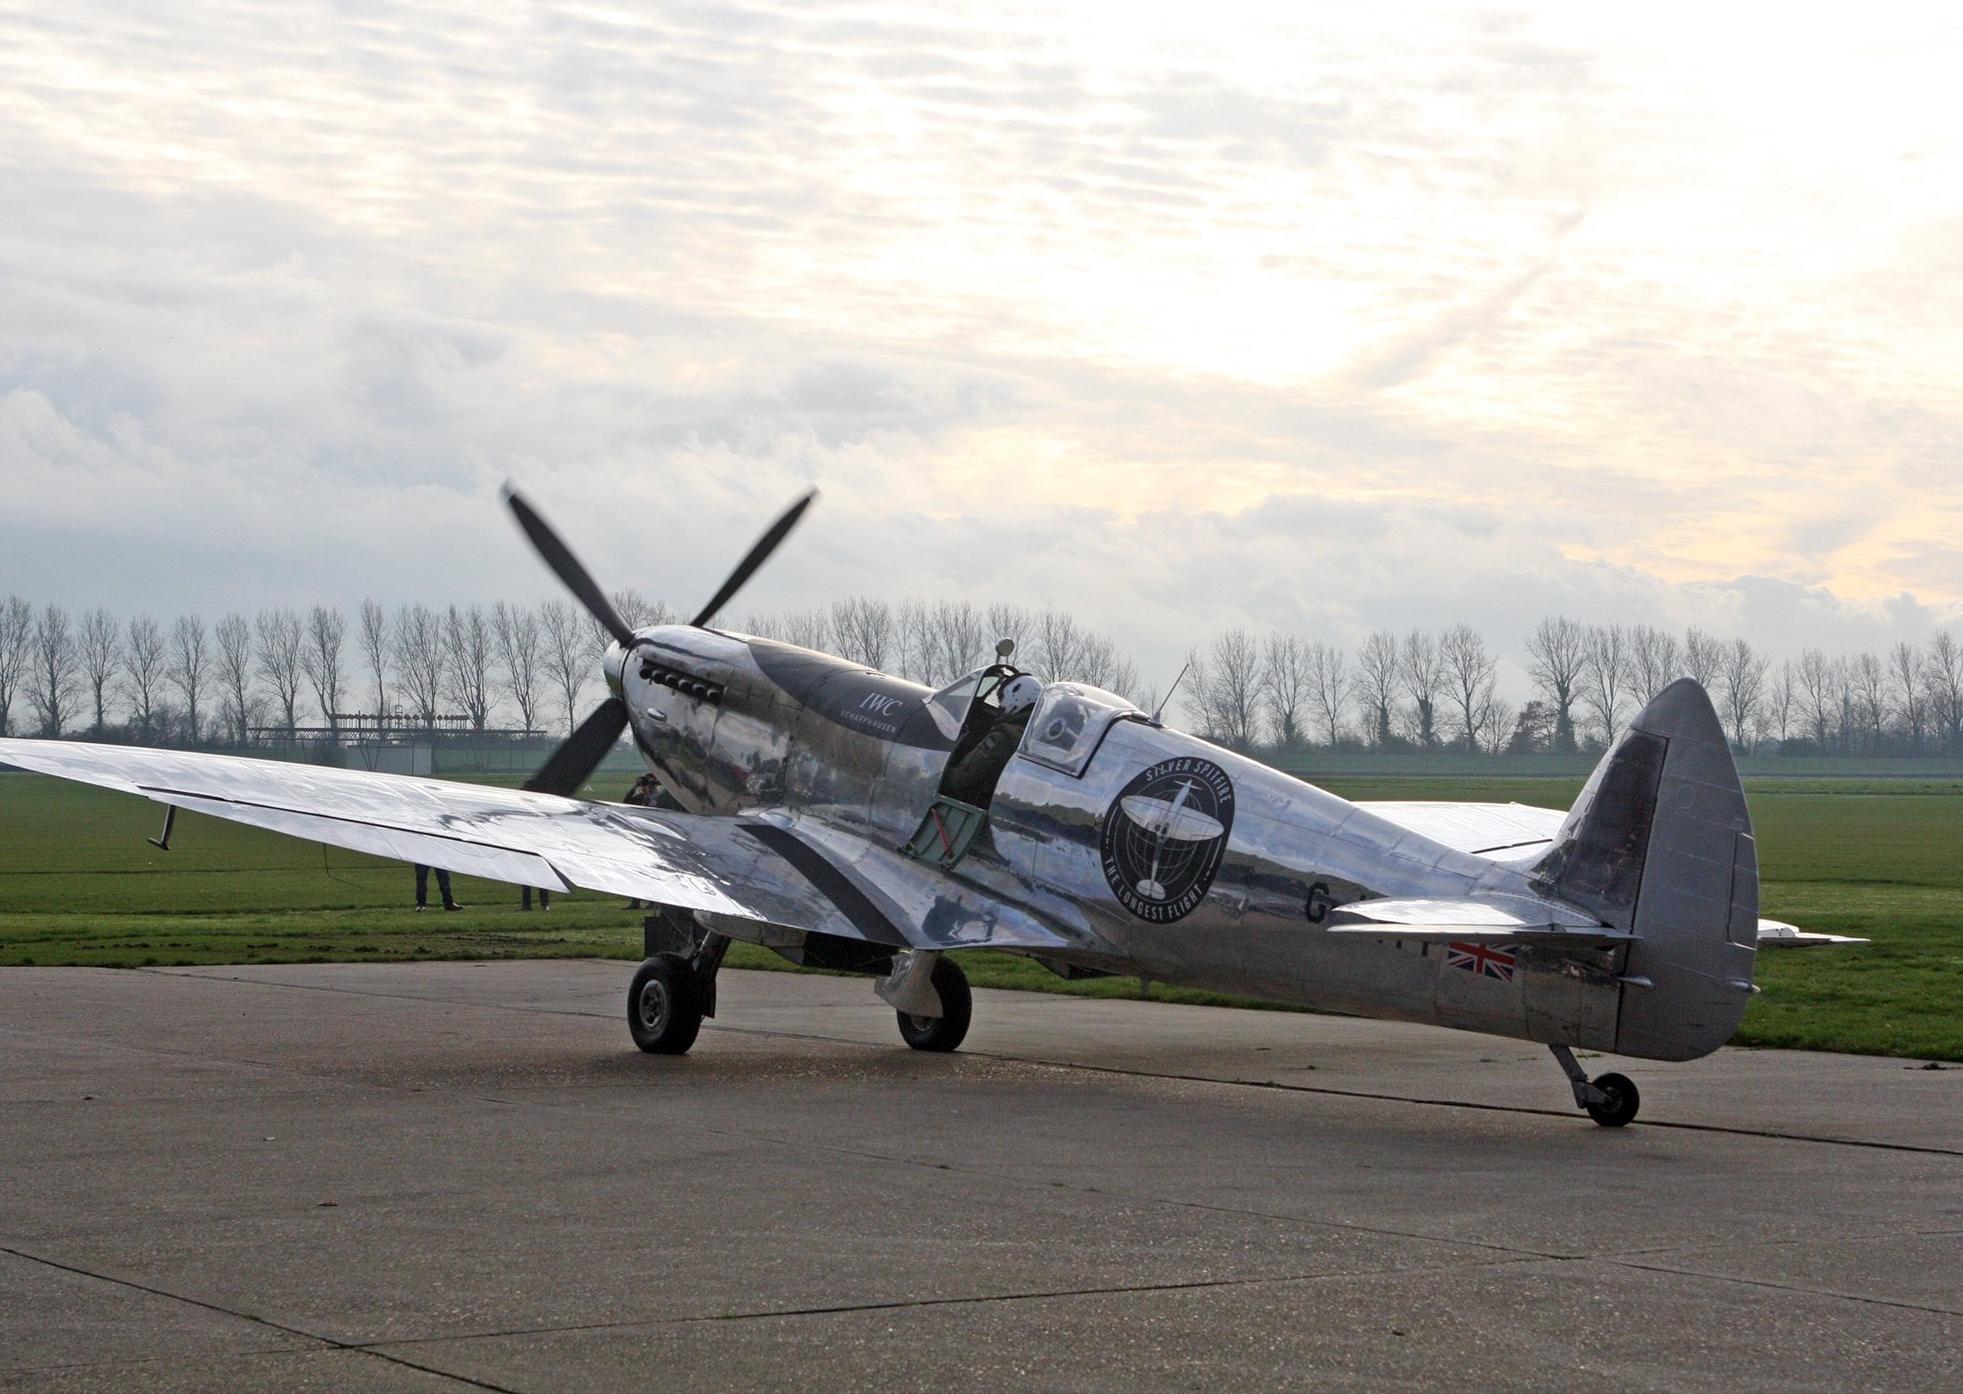 DM19121081a.jpg. A newly-restored spitfire aircraft lands at Goodwood following a 27,000 mile journey around the world. Photo by Derek Martin Photography. SUS-190512-171117008